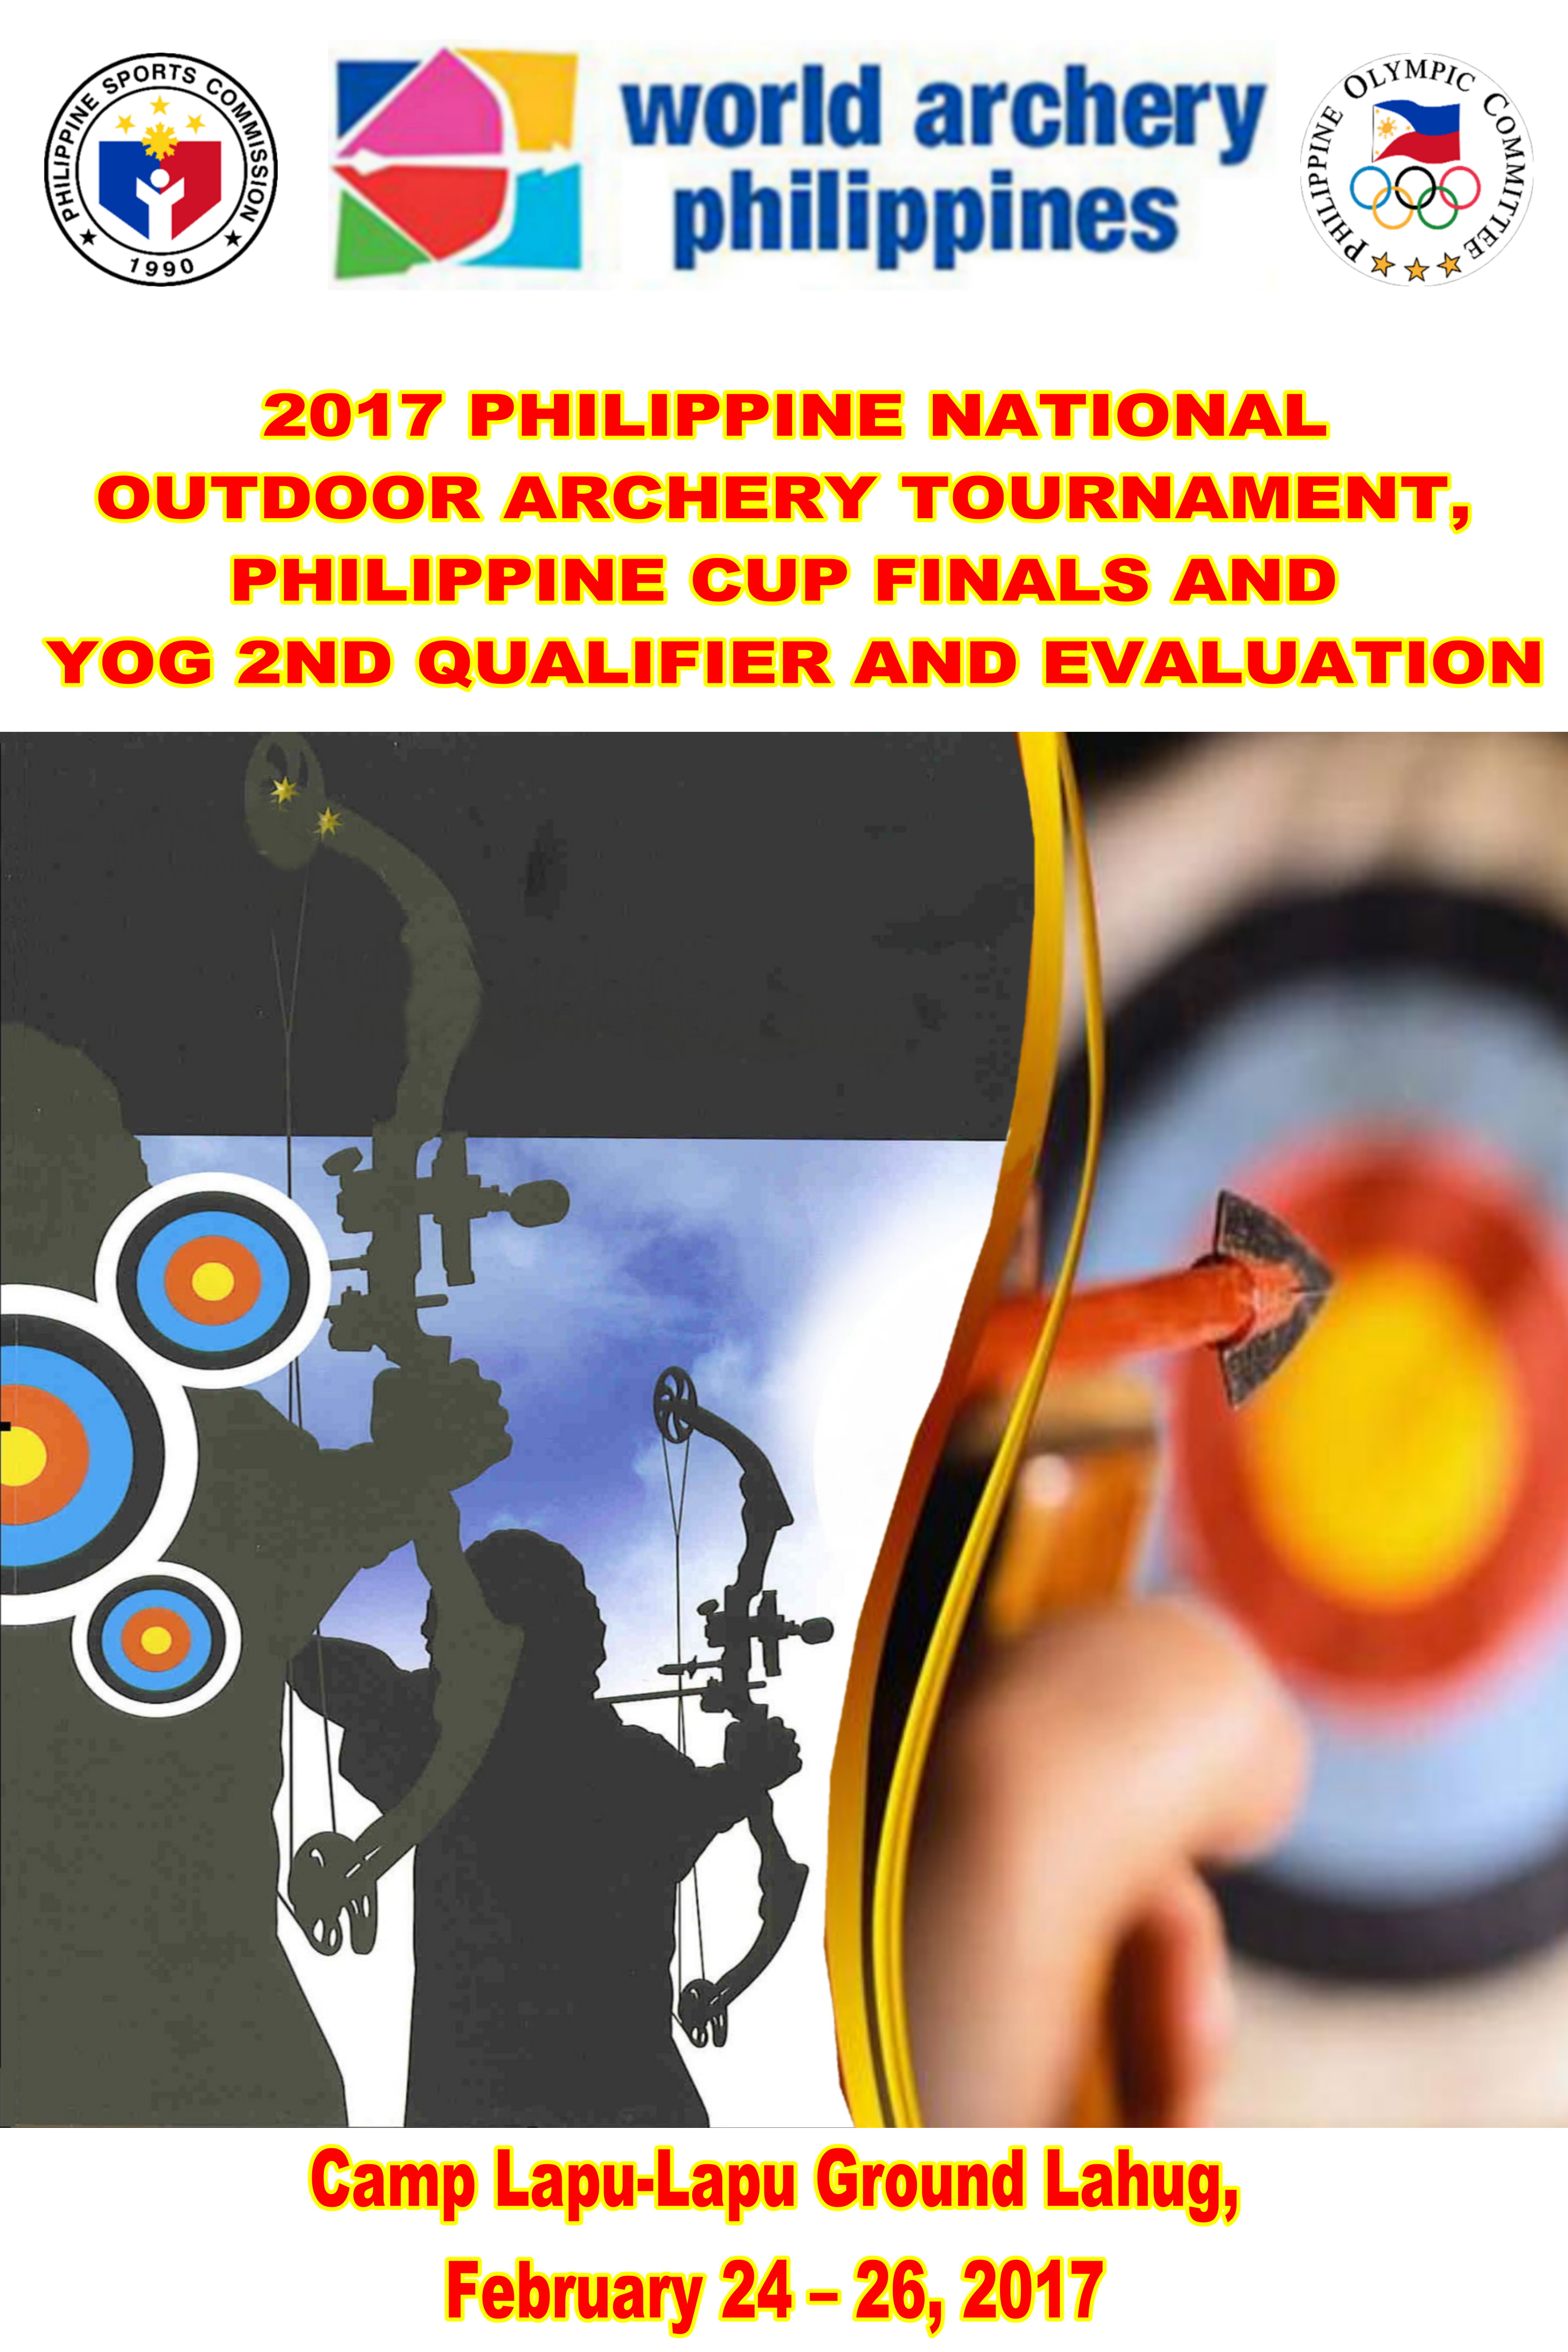  2017 PHILIPPINE NATIONAL OUTDOOR ARCHERY TOURNAMENT,   PHILIPPINE CUP FINALS AND YOG 2ND QUALIFIER AND EVALUATION